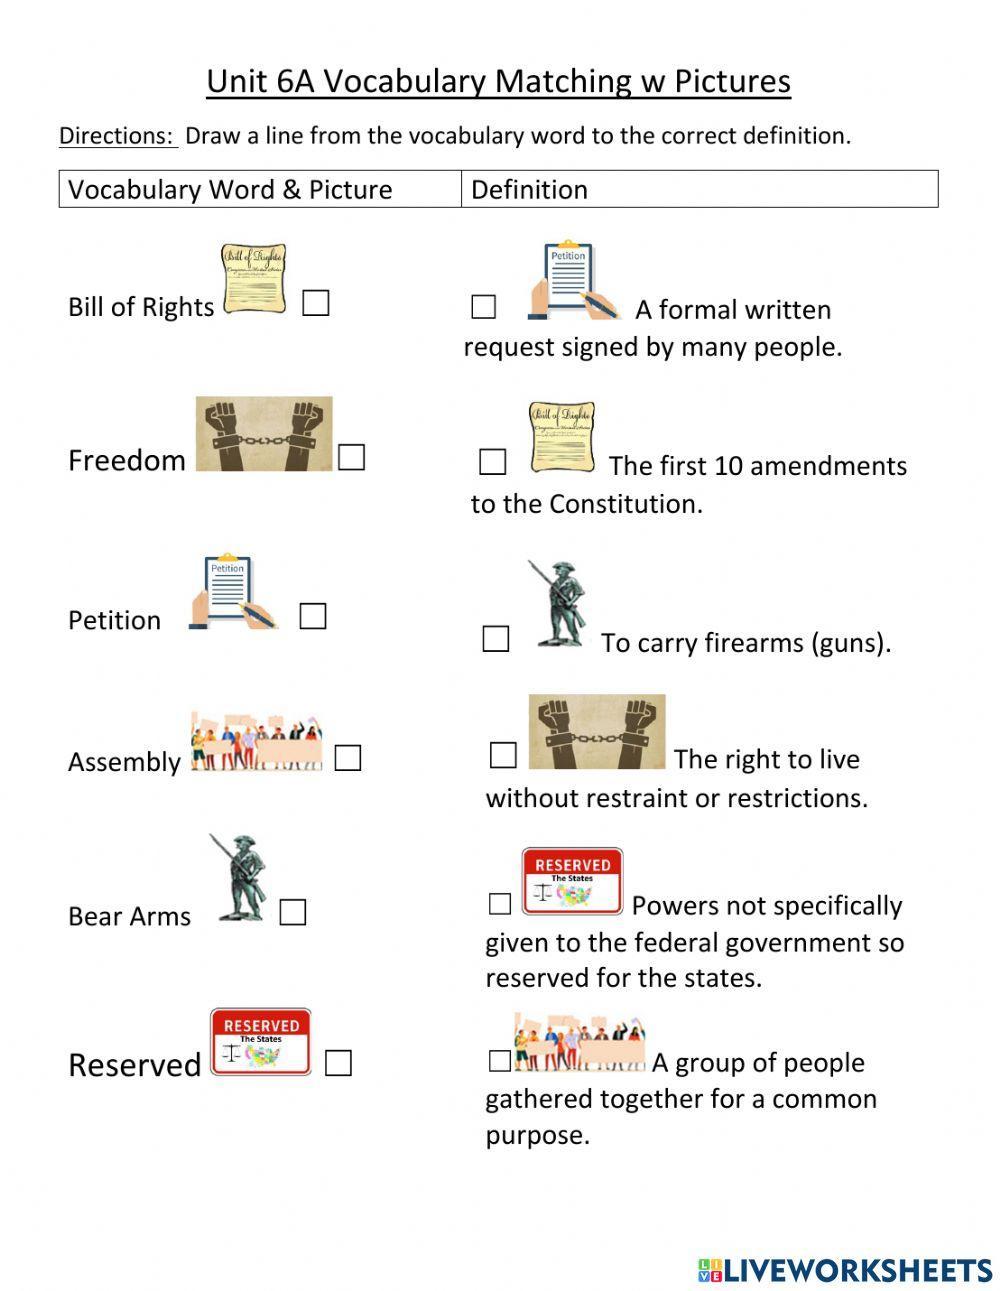 Unit 6A Bill of Rights Vocabulary Matching with Pictures